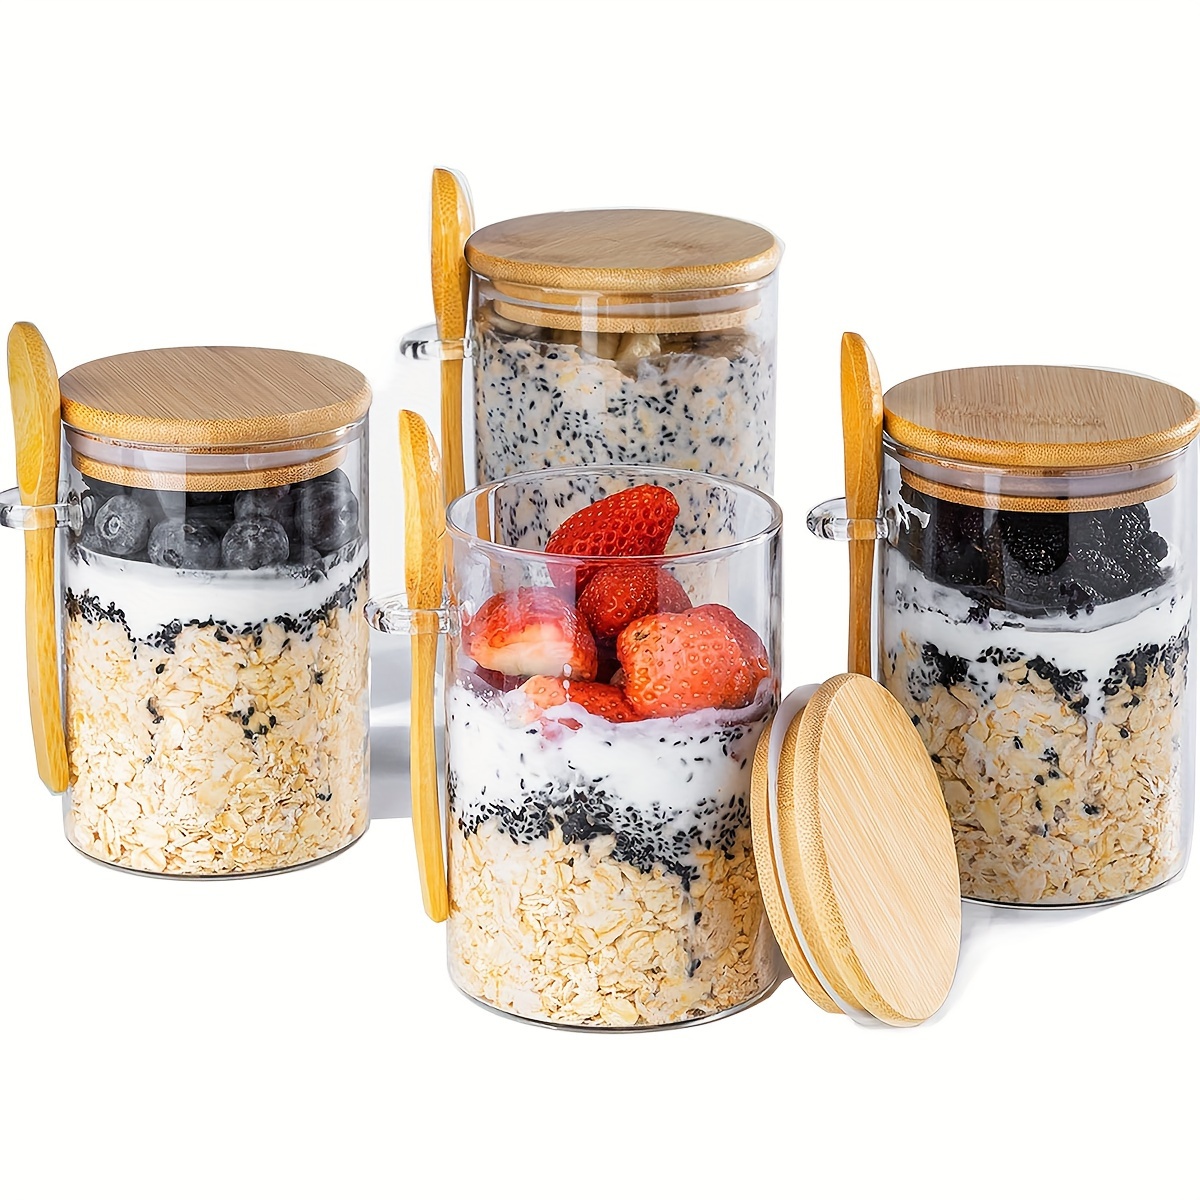 

4pcs, Glass Jar, 16oz, Condiment Jar, Oatmeal Cups, Salad Cups, Oatmeal Jar, Meal Preparation Container With Lid And Spoon, Glass Jar For Chia Seeds, Pudding, Yogurt, Salads, Cereal, Kitchen Stuff